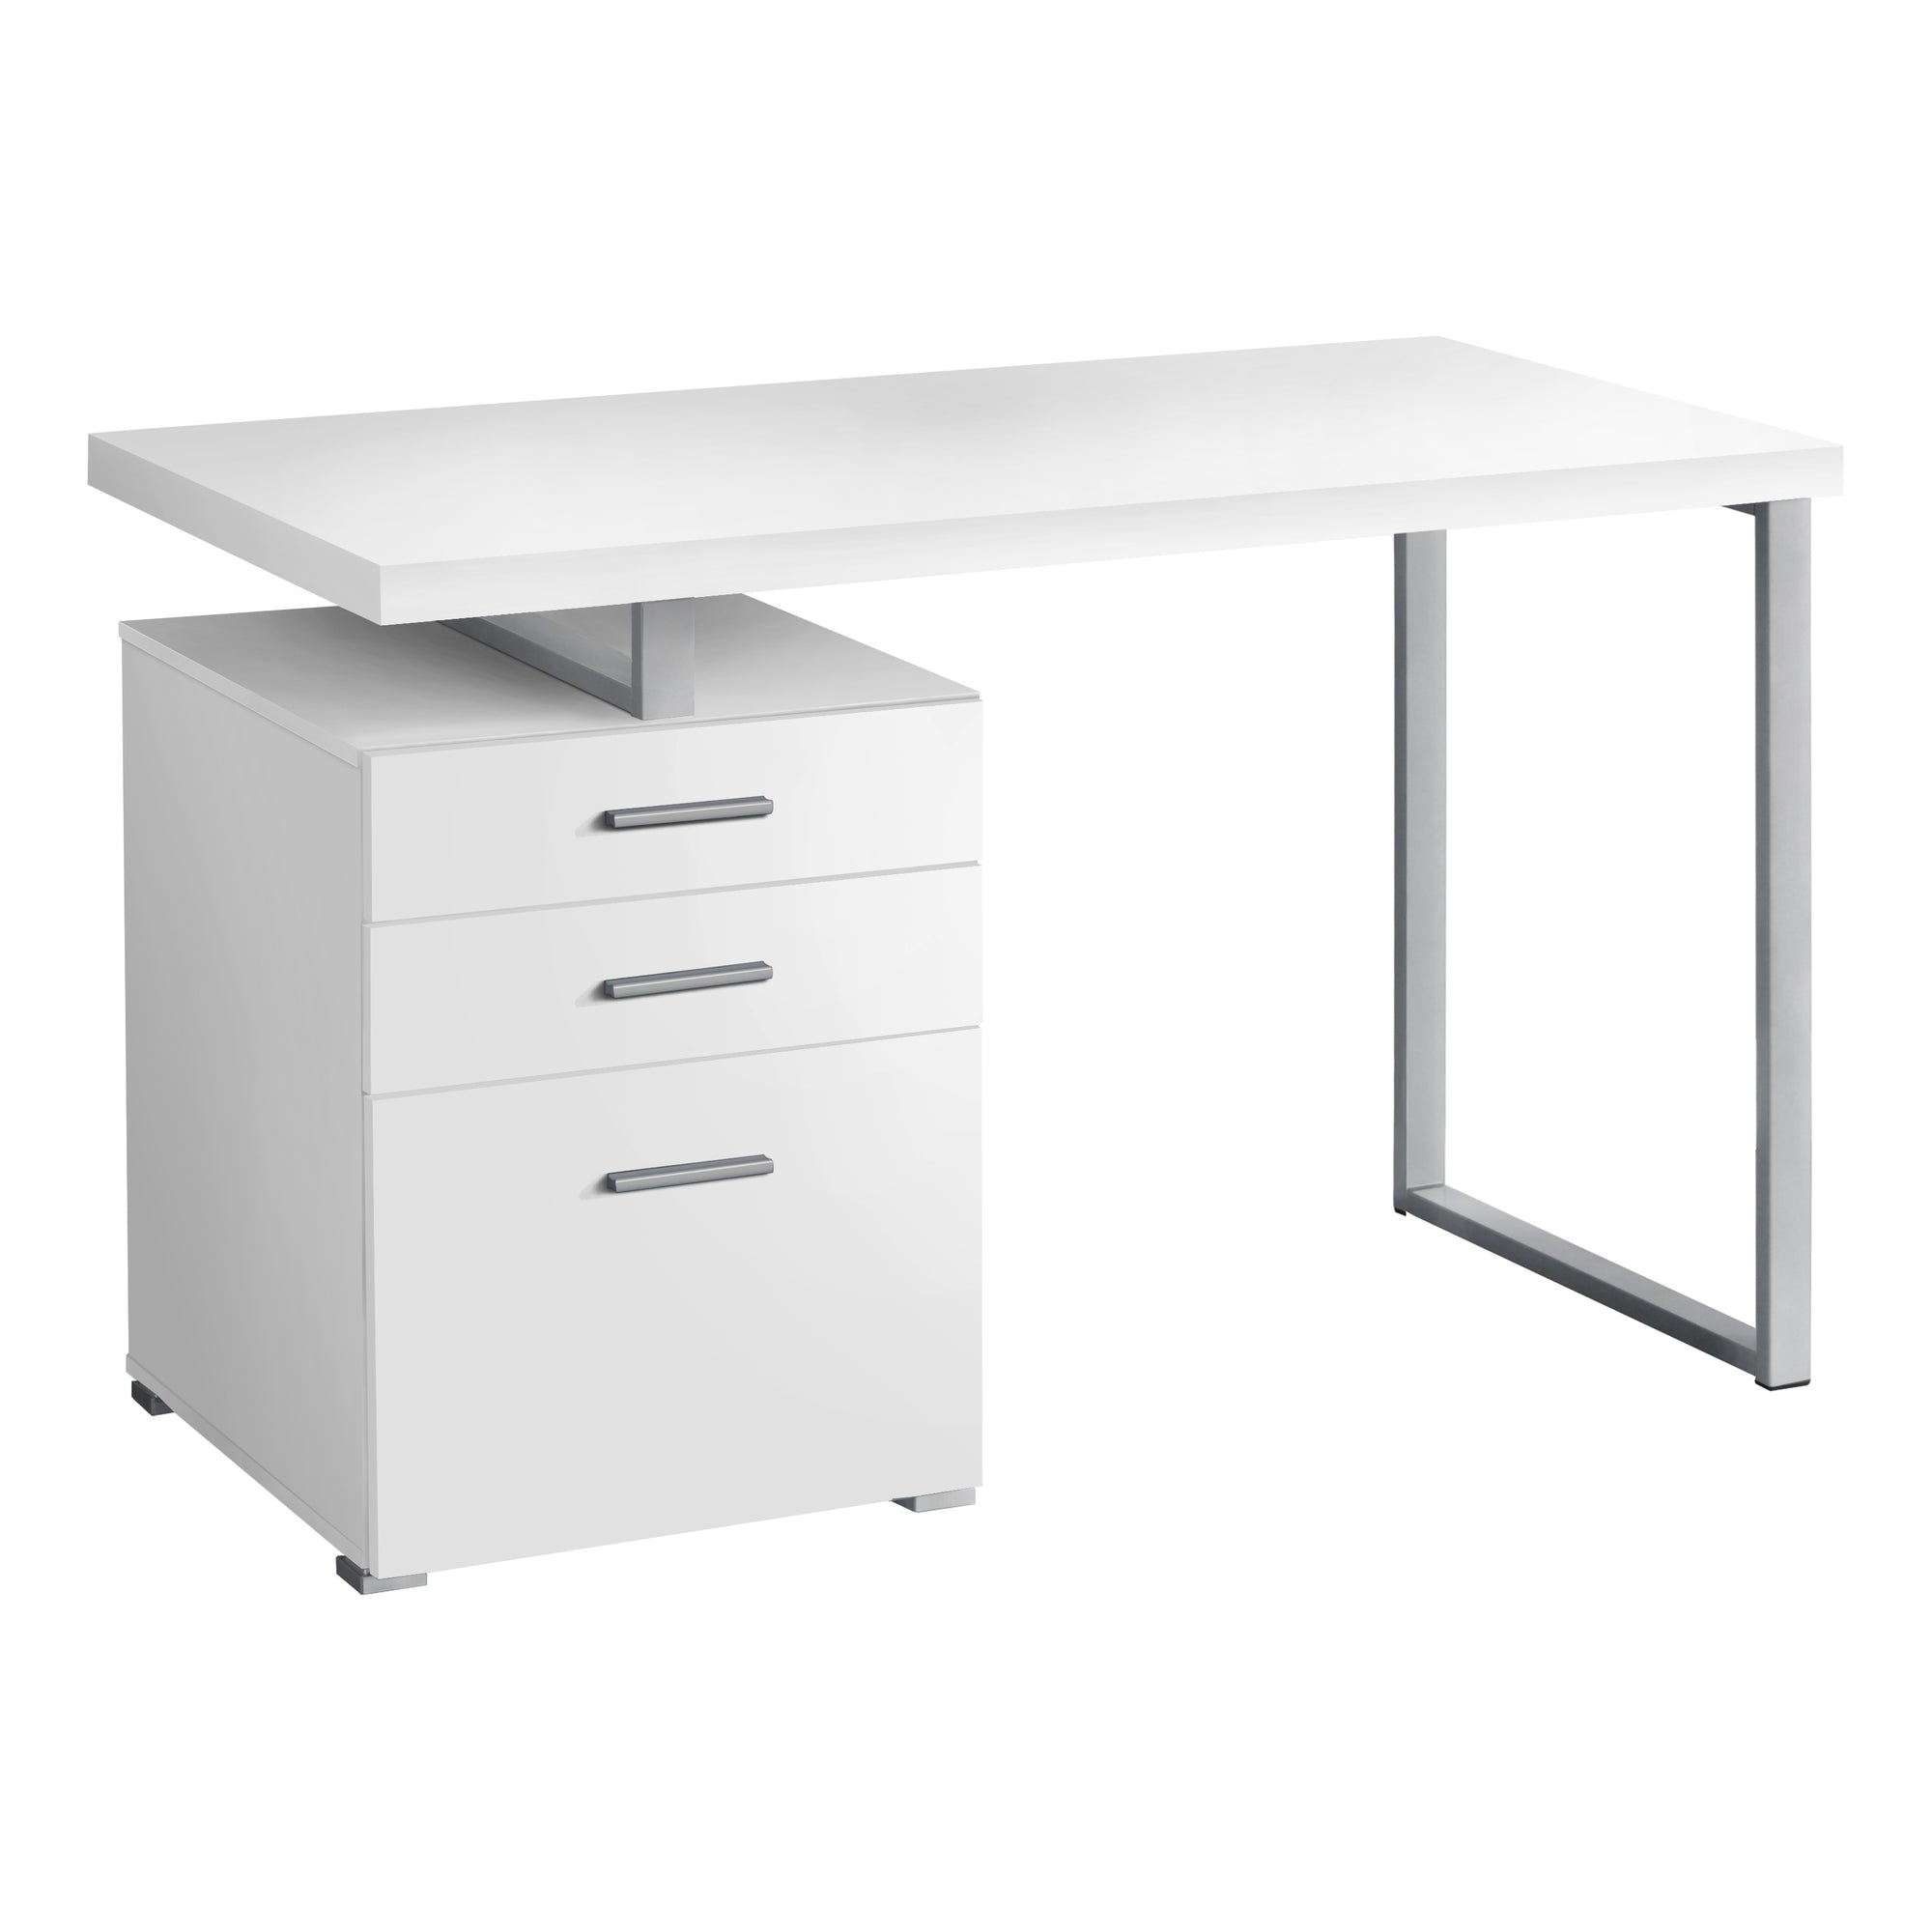 MN-747027    Computer Desk, Home Office, Laptop, Left, Right Set-Up, Storage Drawers, 48"L, Metal, Laminate, White, White, Contemporary, Modern